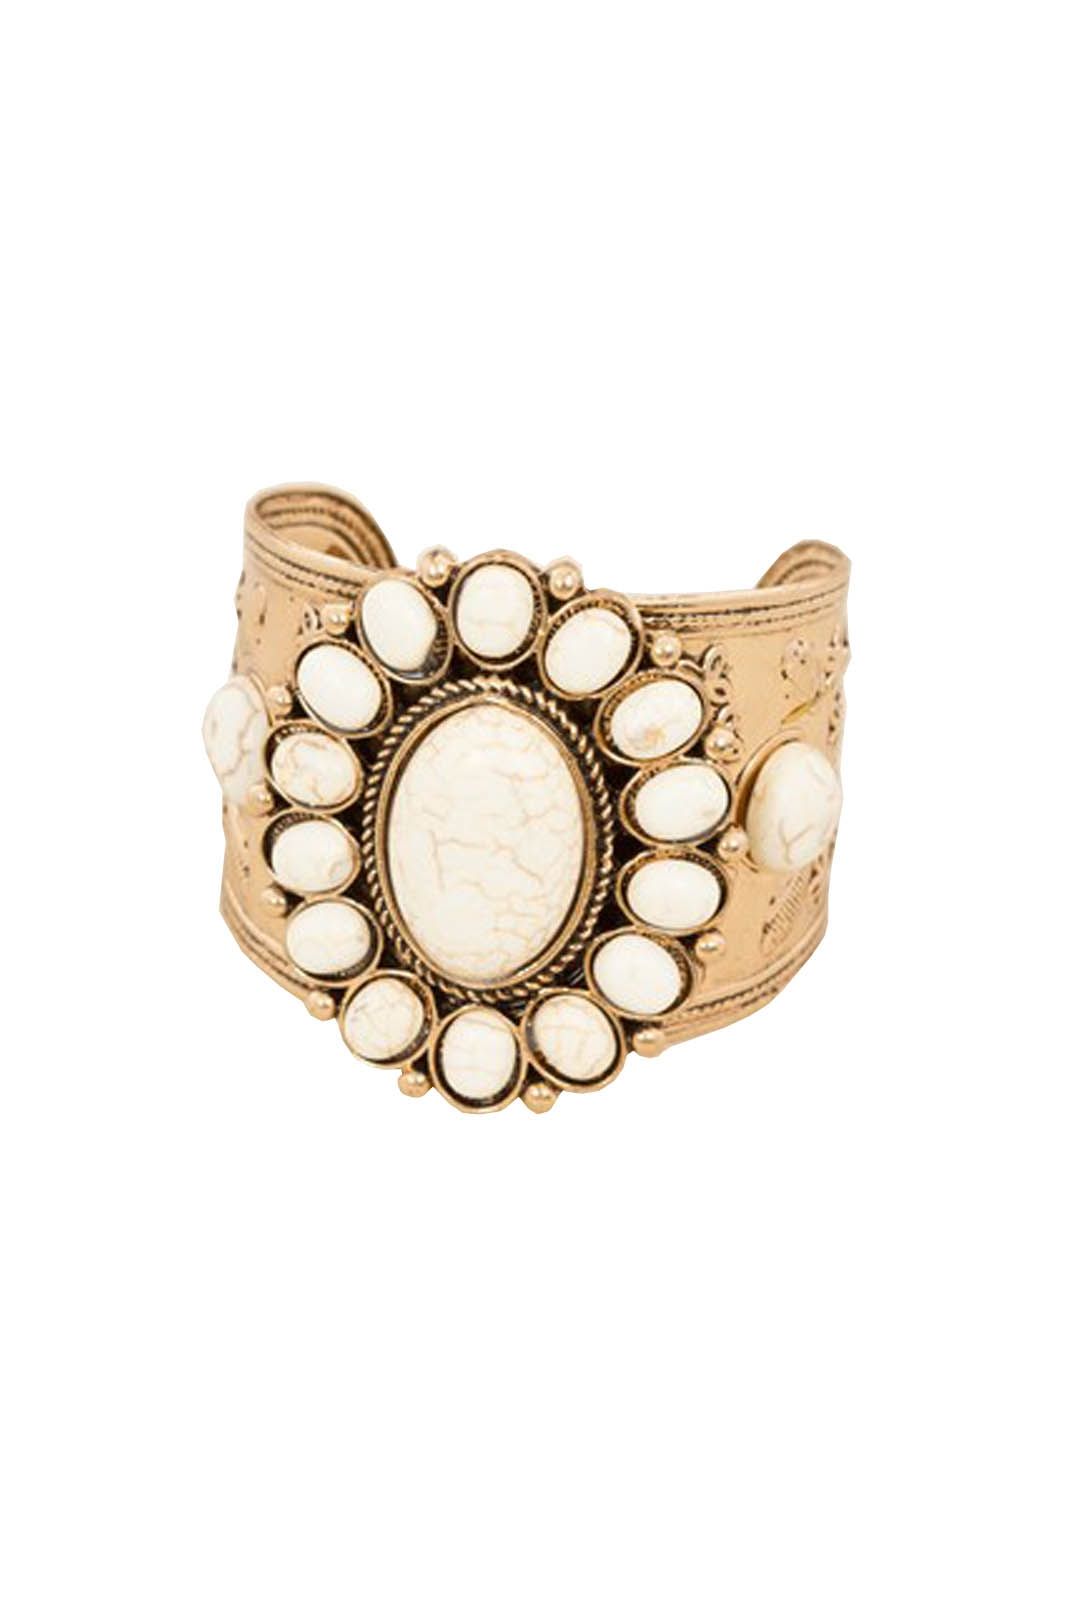 Adorne - Moroccan Stone Flower Metal Cuff - Gold - Front